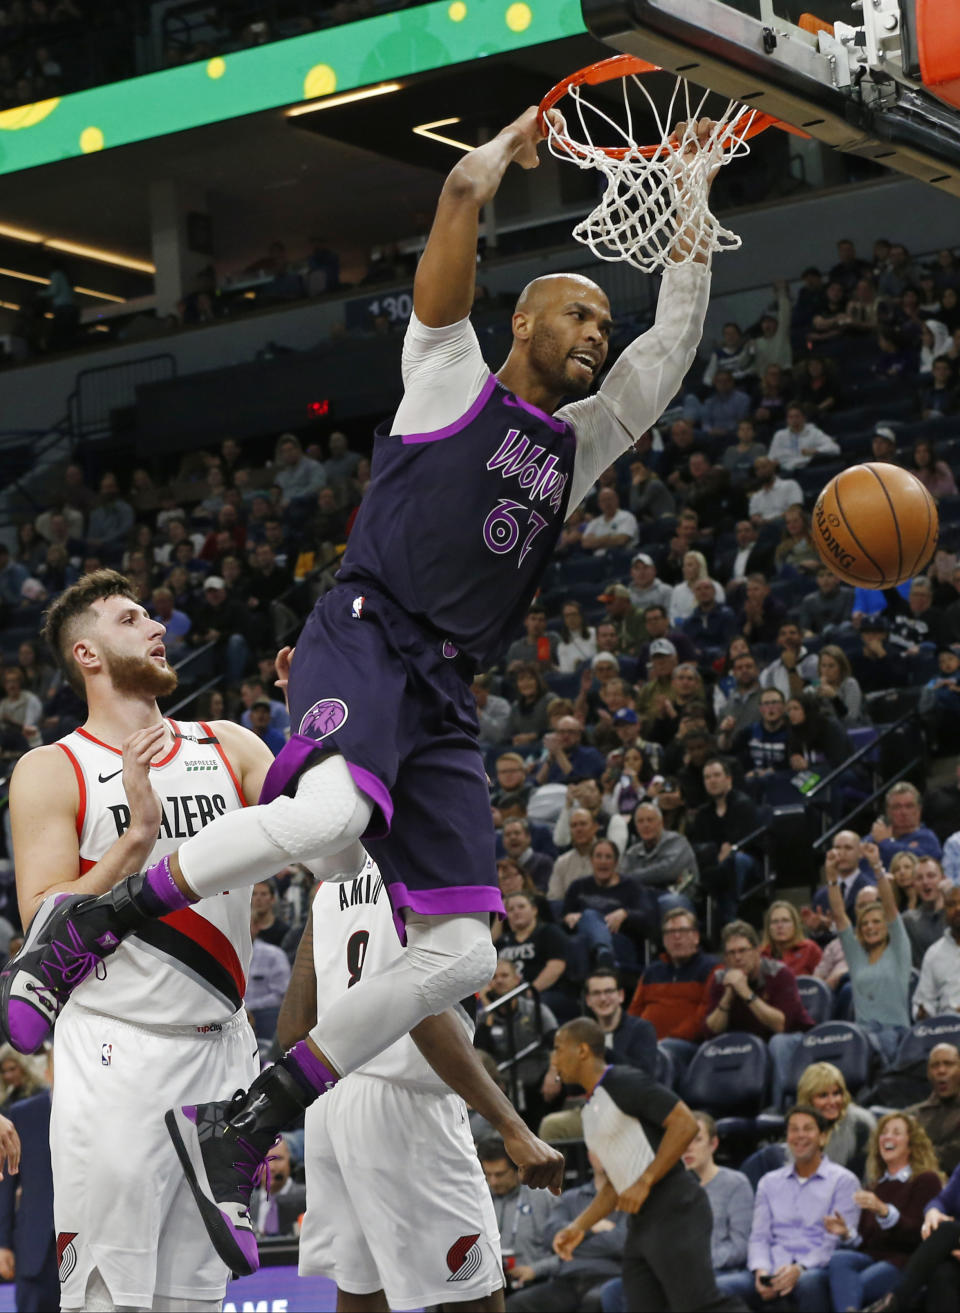 Minnesota Timberwolves' Taj Gibson, right, dunks as Portland Trail Blazers' Jusuf Nurkic watches during the second half of an NBA basketball game Friday, Nov. 16, 2018, in Minneapolis. The Timberwolves won 112-96. (AP Photo/Jim Mone)